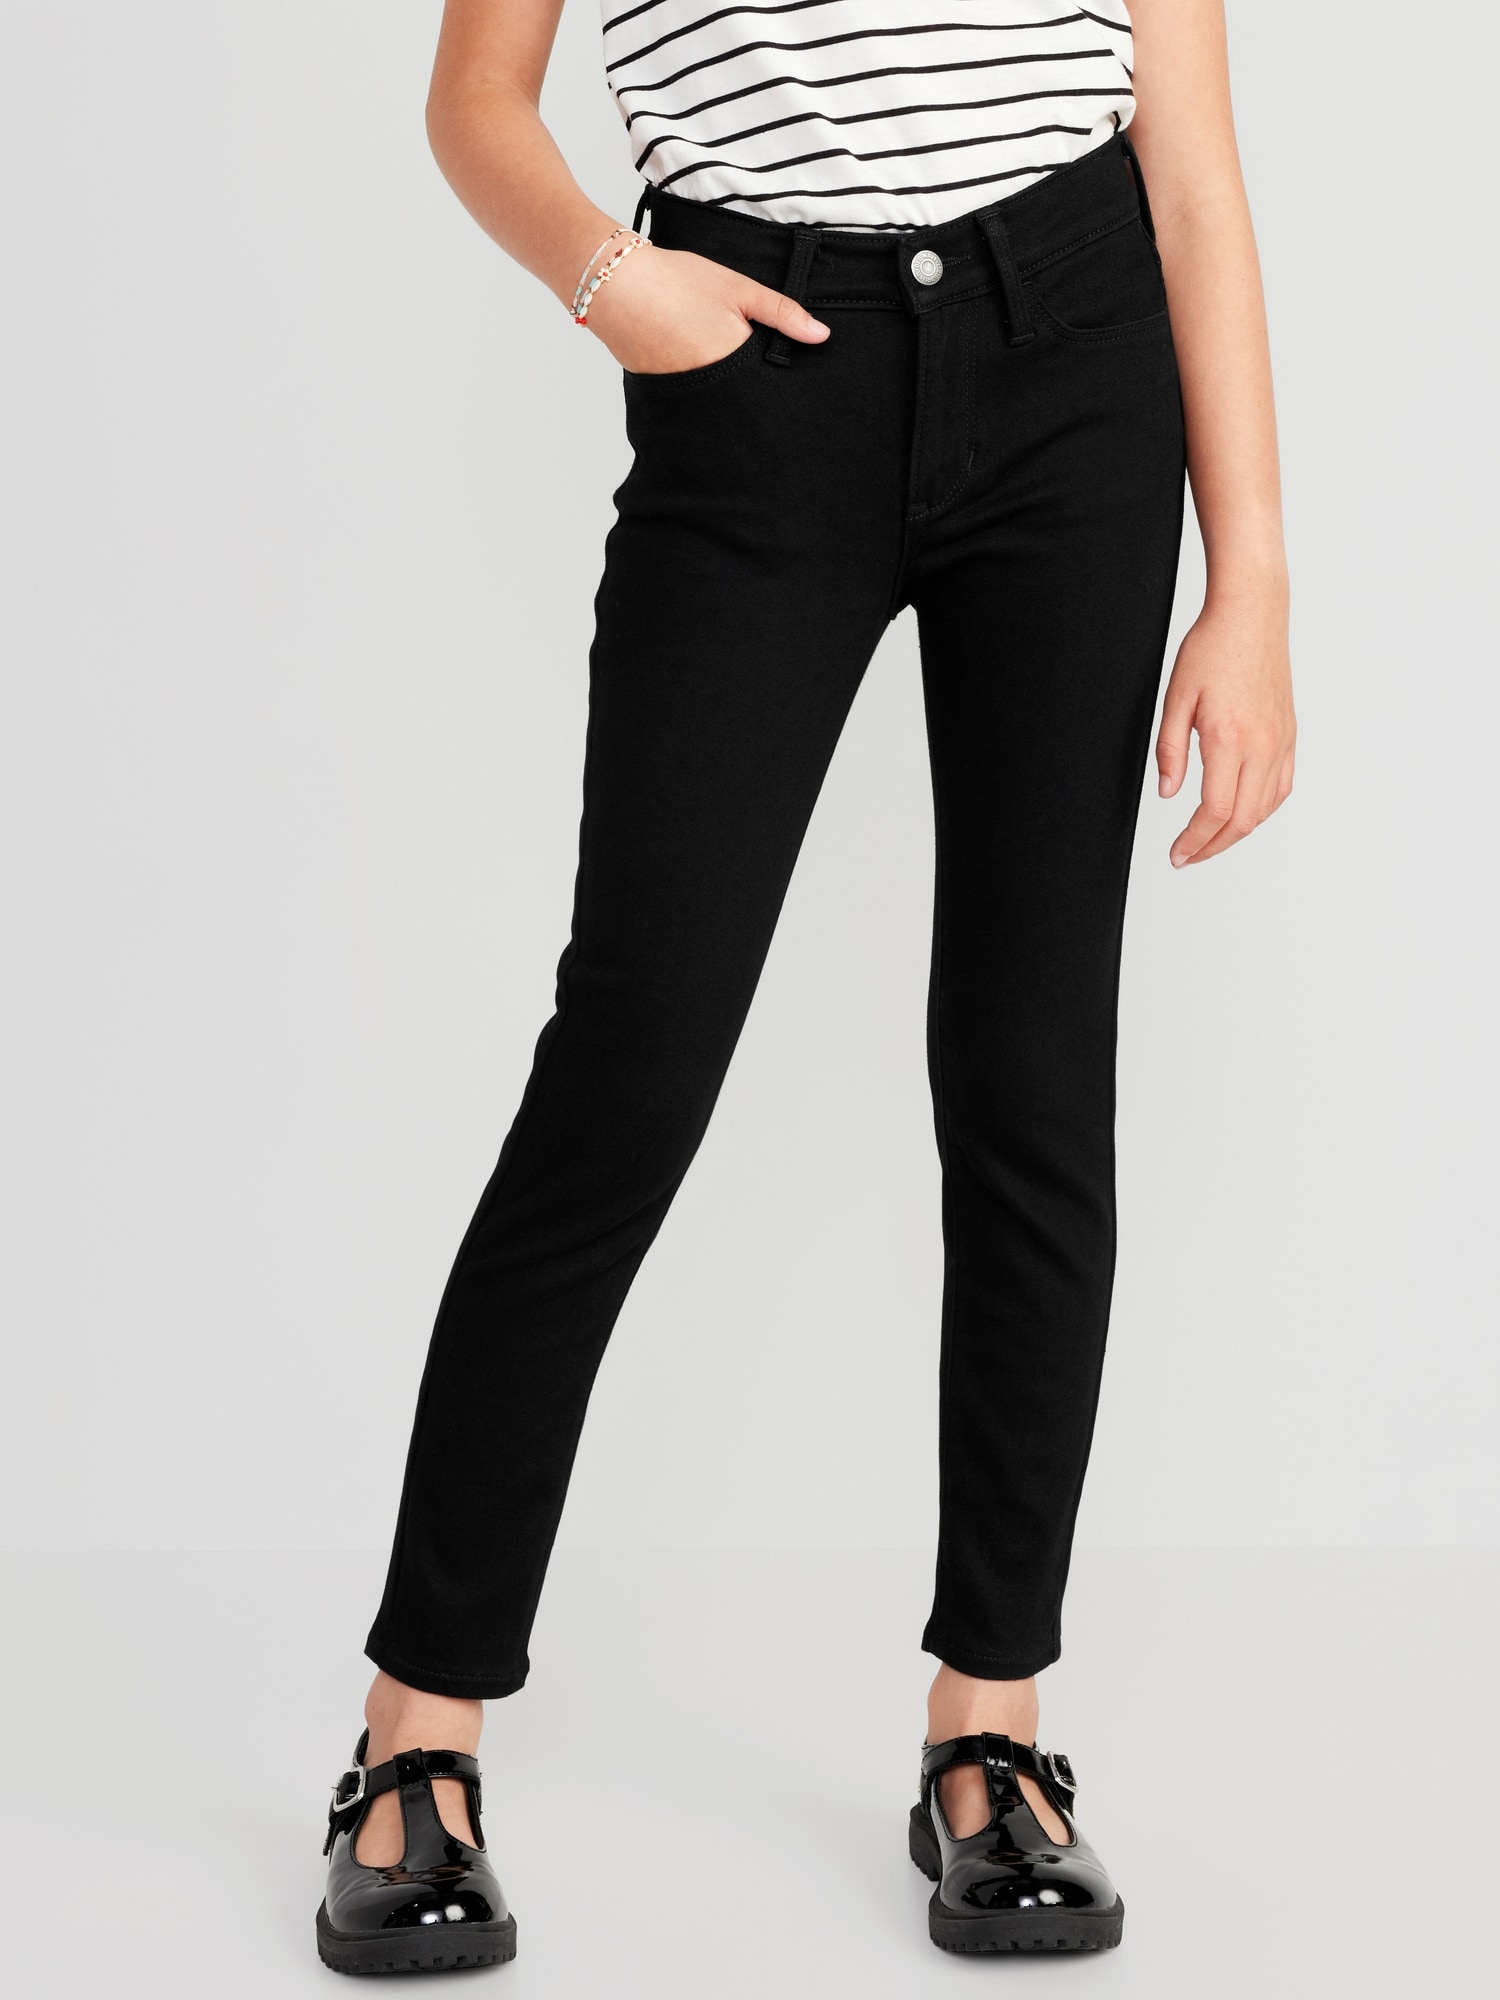 Jeggings - Upto 50% to 80% OFF on Ladies Jeggings Online at